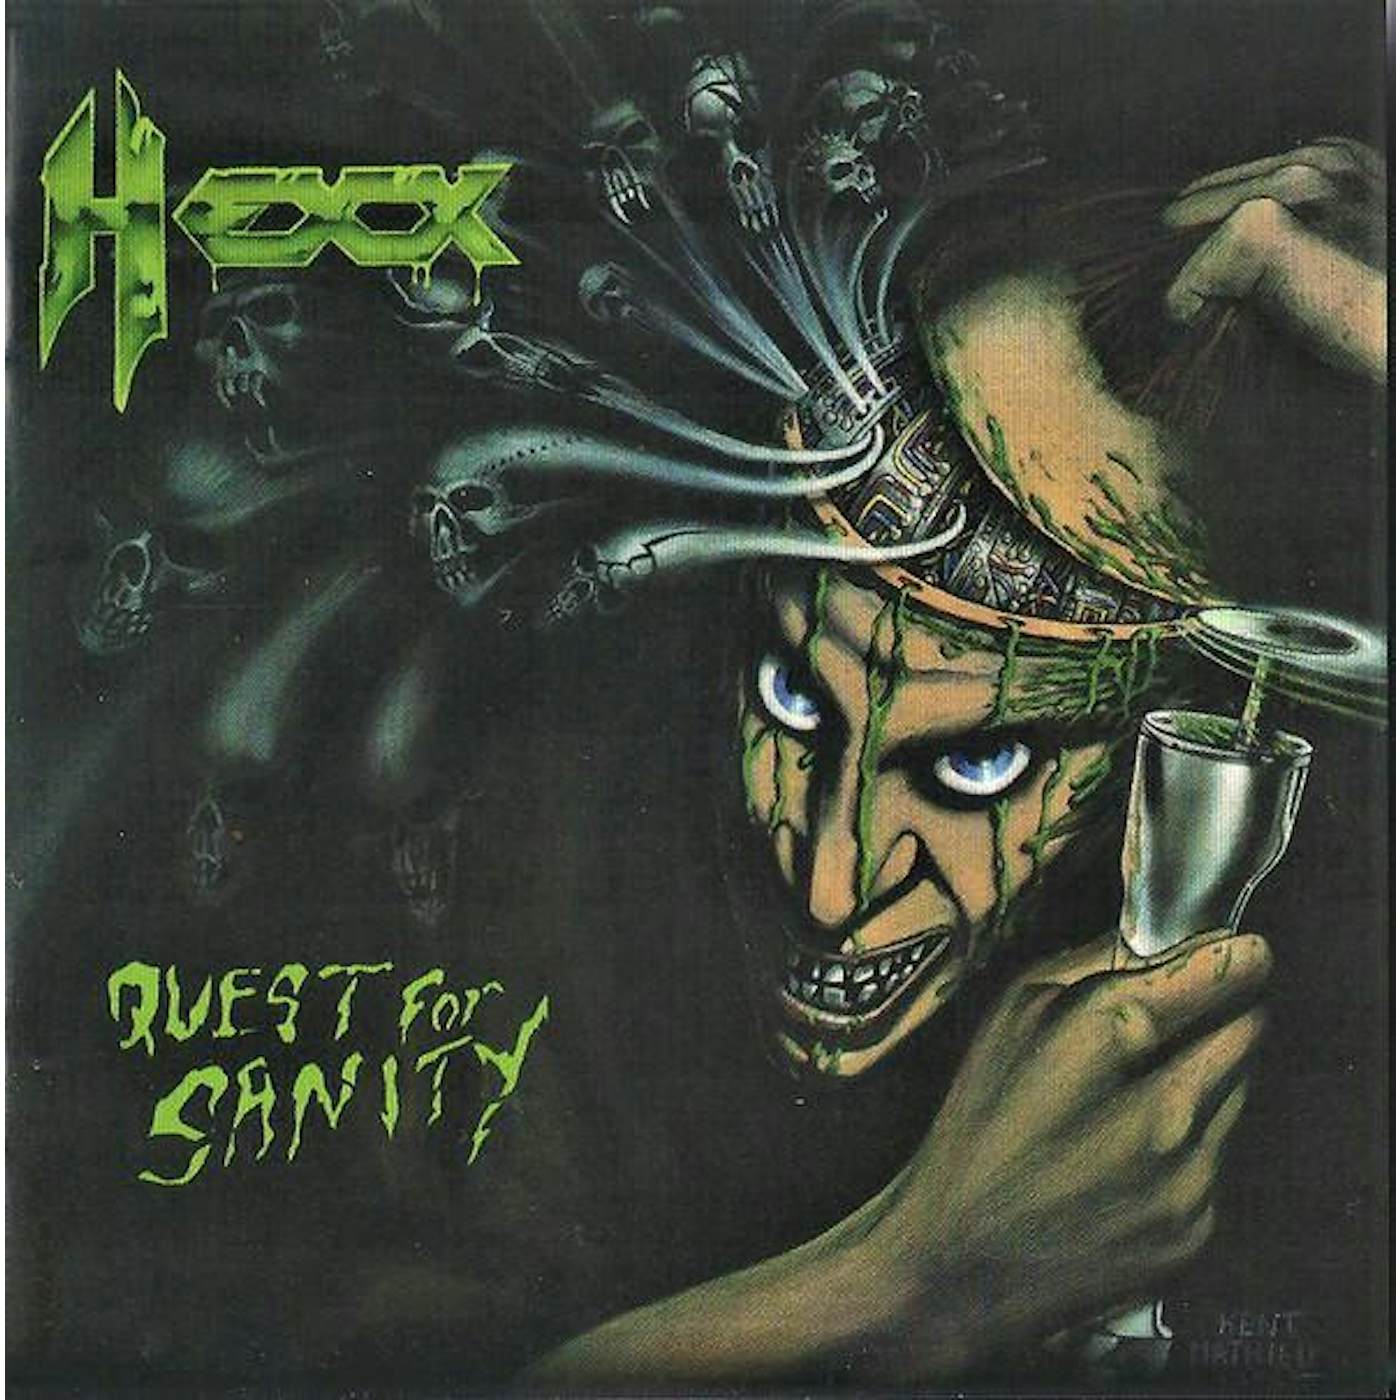 Hexx Quest For Sanity & Watery Graves Vinyl Record